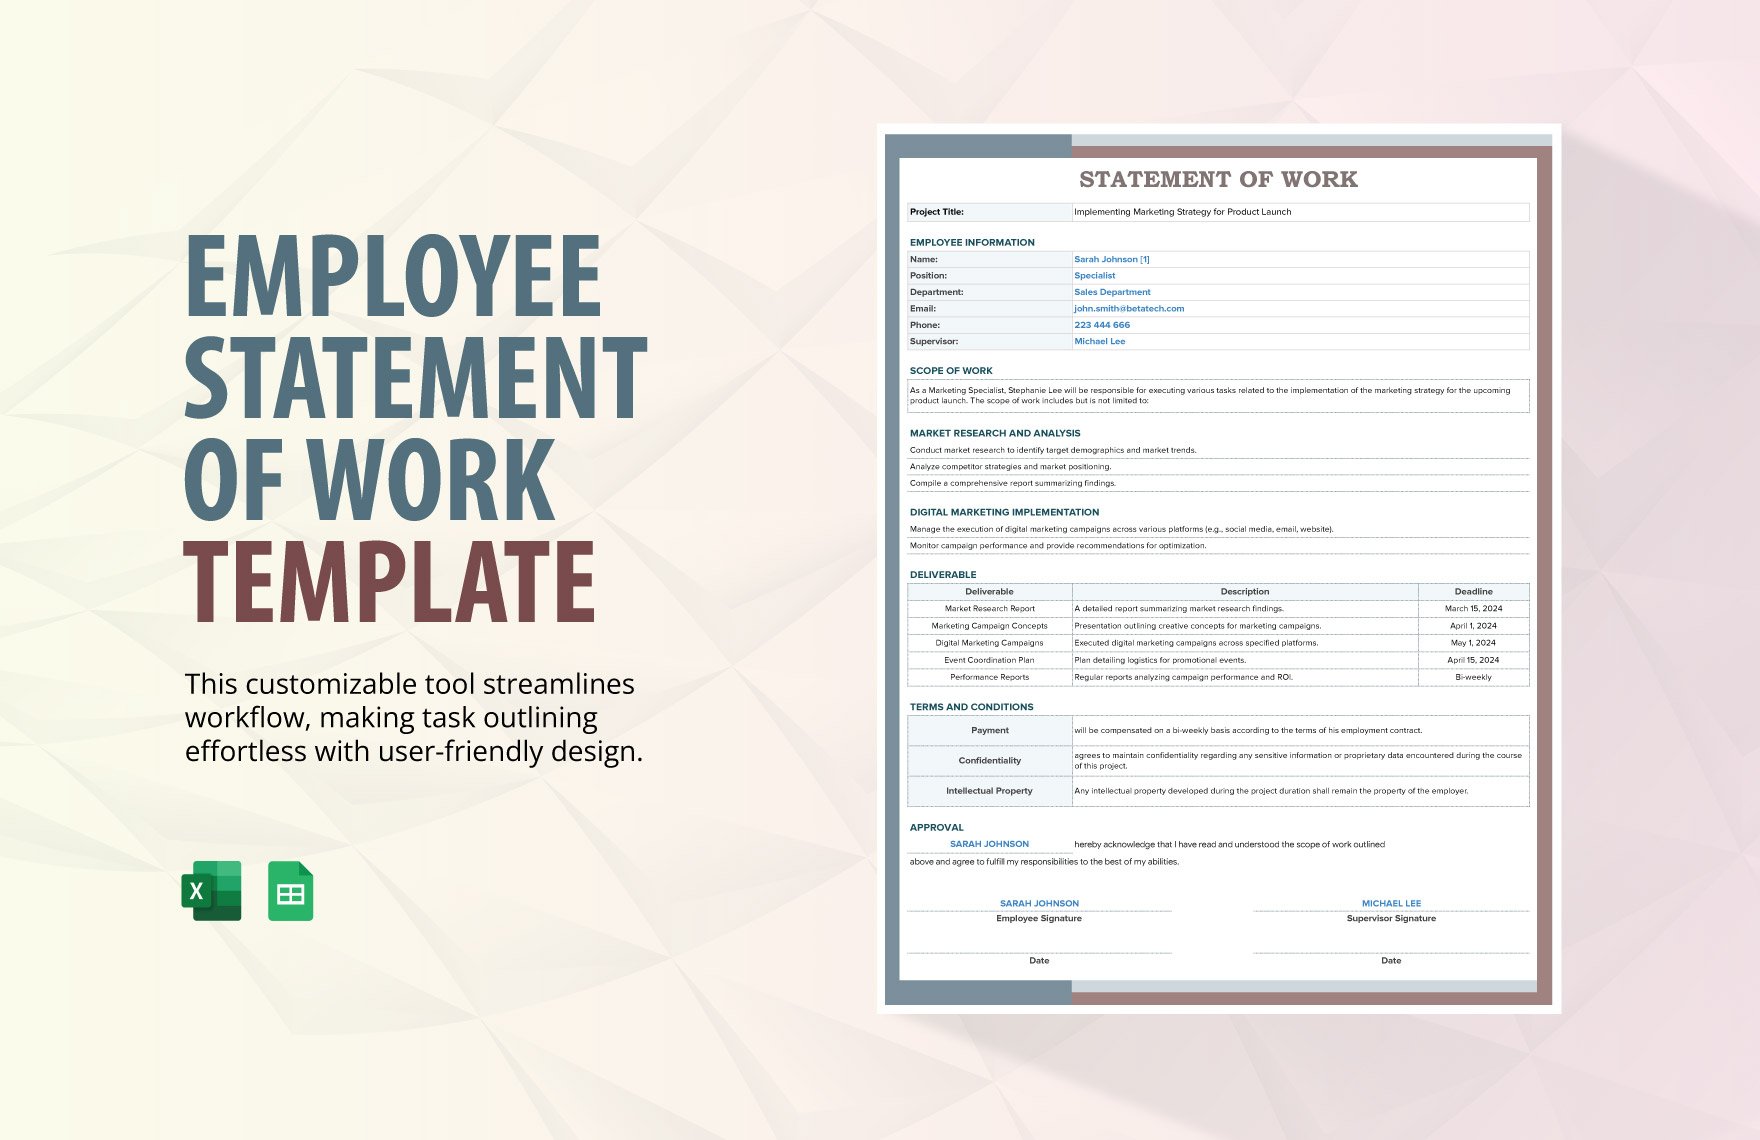 Employee Statement of Work Template in Excel, Google Sheets